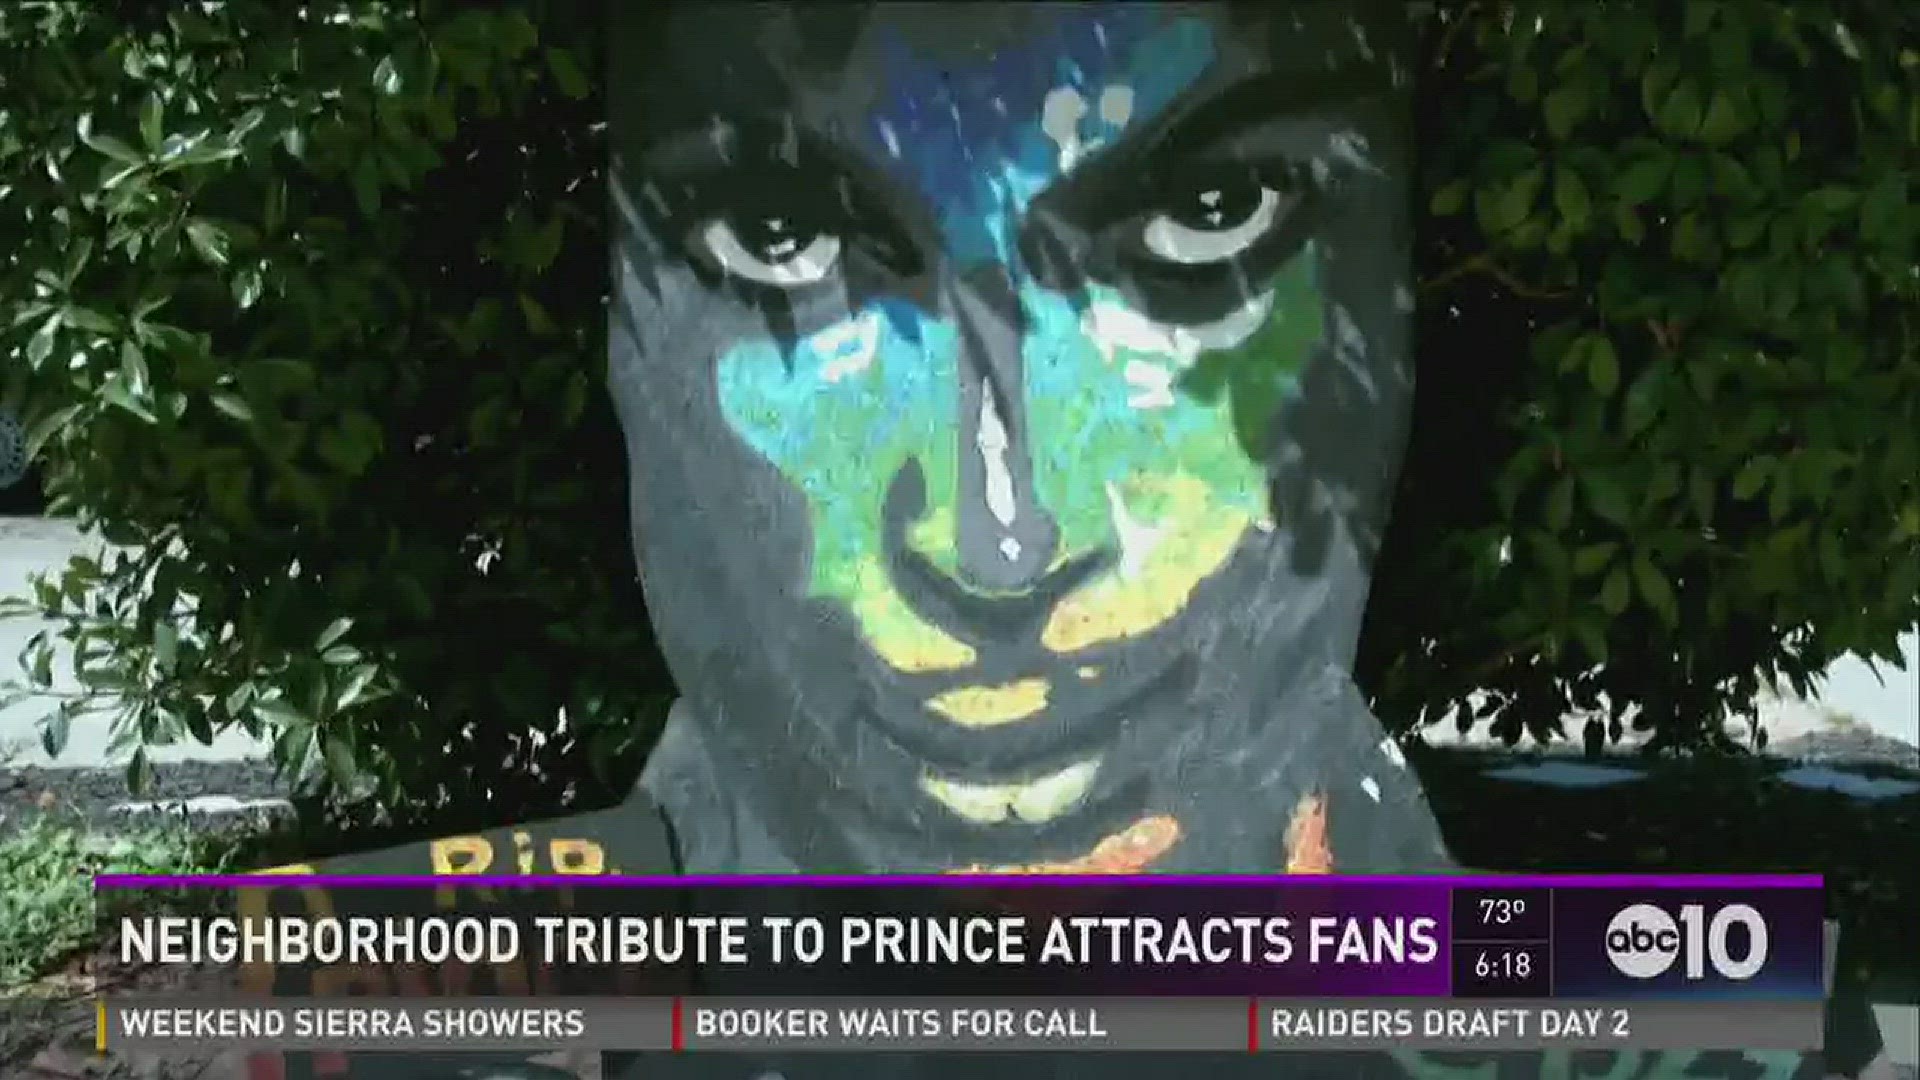 A local artist built a special tribute to Prince in her front yard. ABC10's Gabrielle Karol introduces us to the artist, whose work is attracting fans.